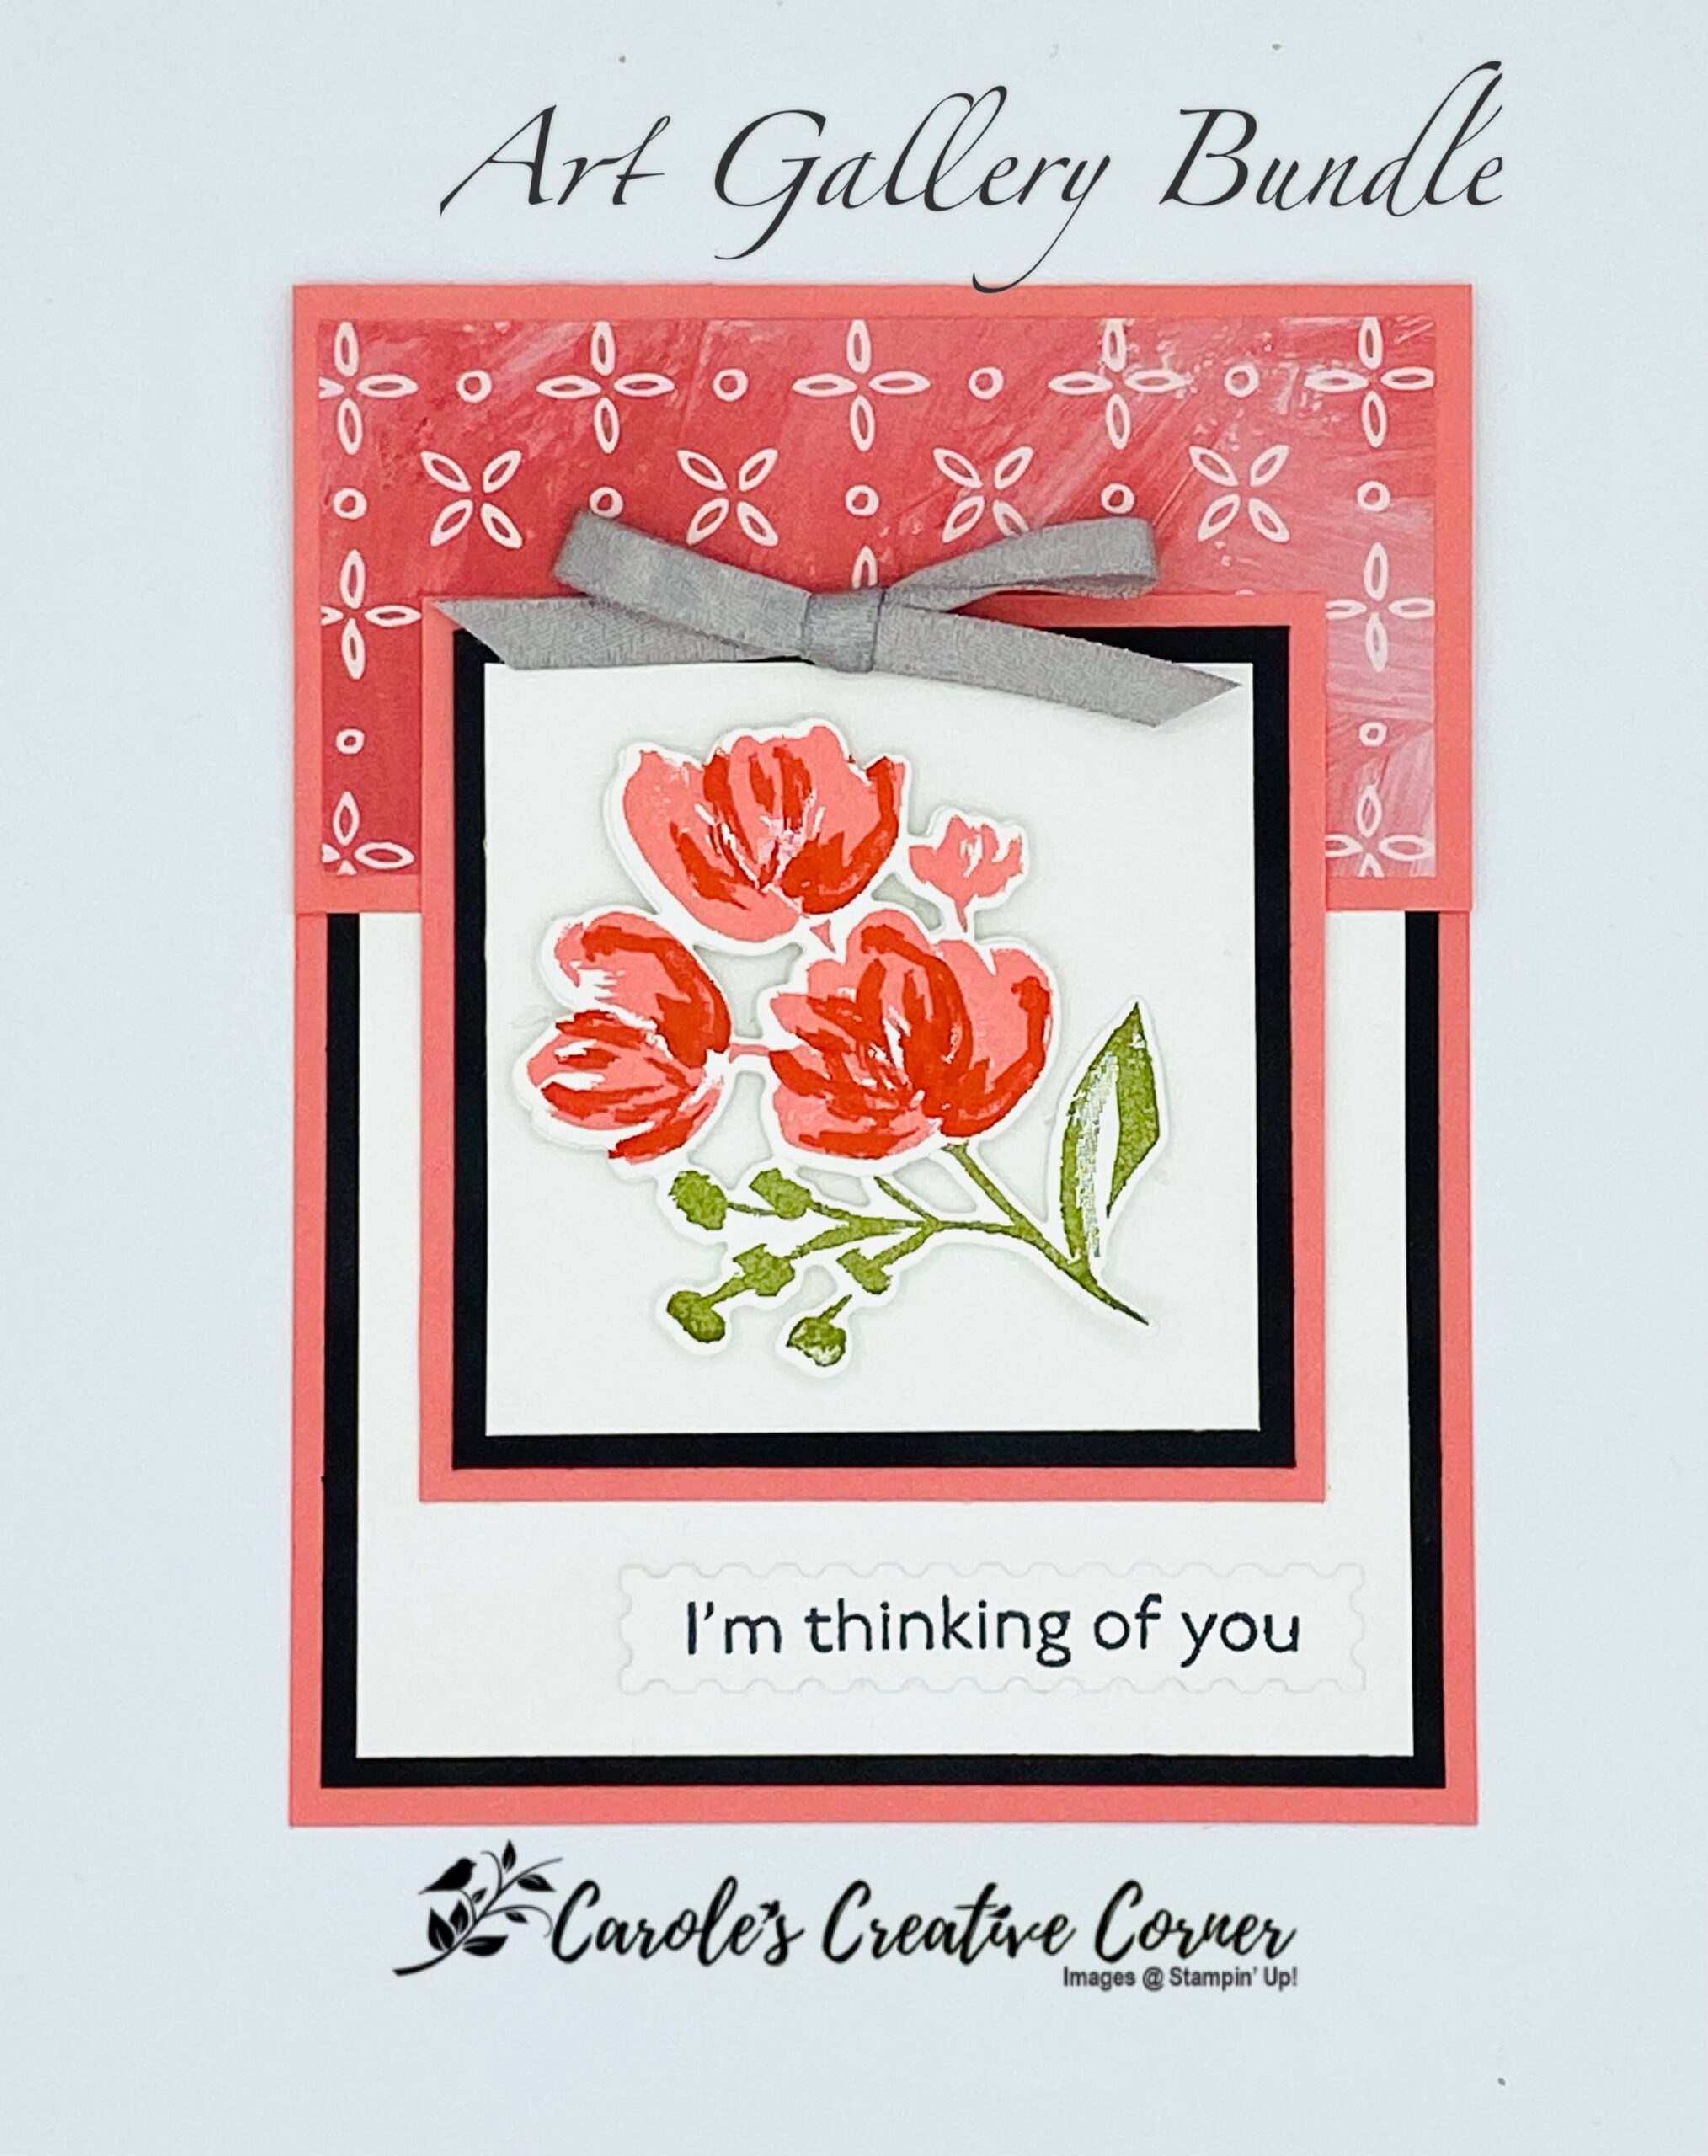 Art Gallery Bundle Thinking of You Card